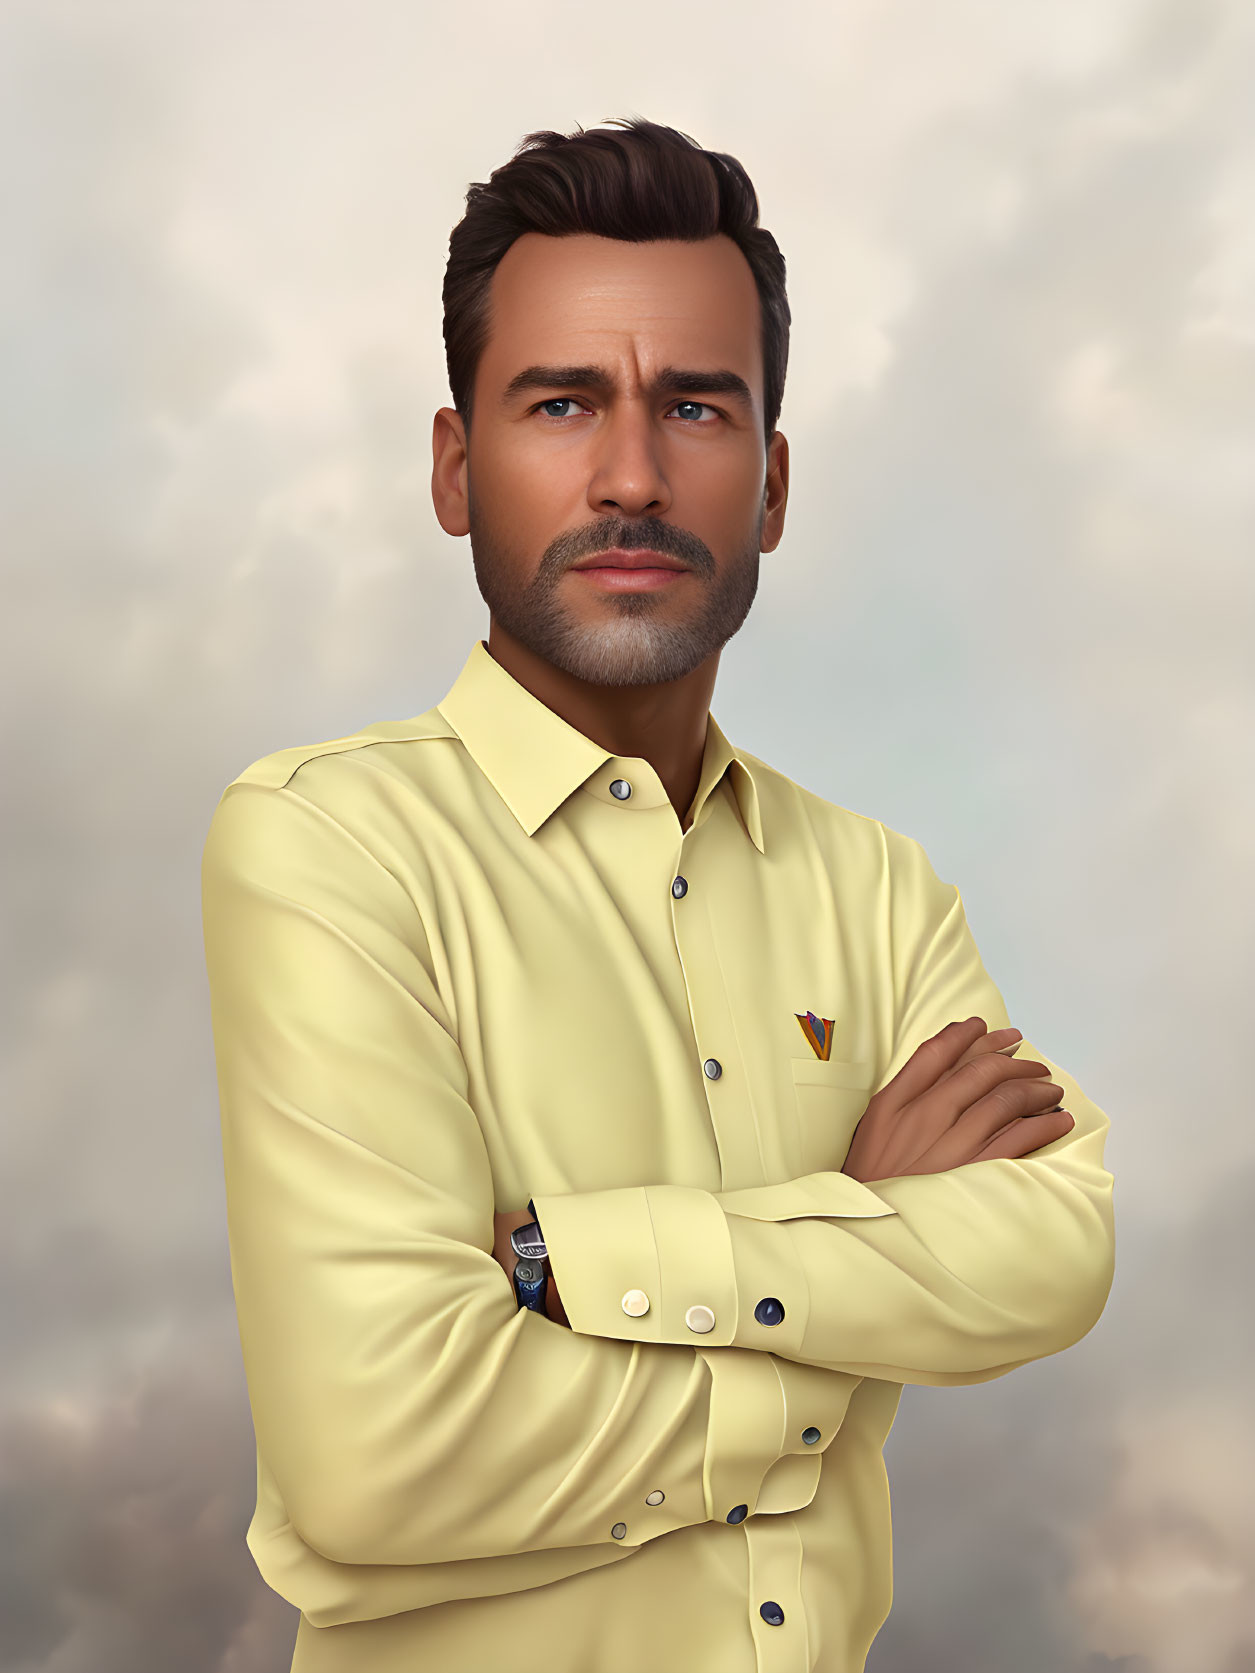 Man with Stubble in Yellow Shirt Against Cloudy Backdrop